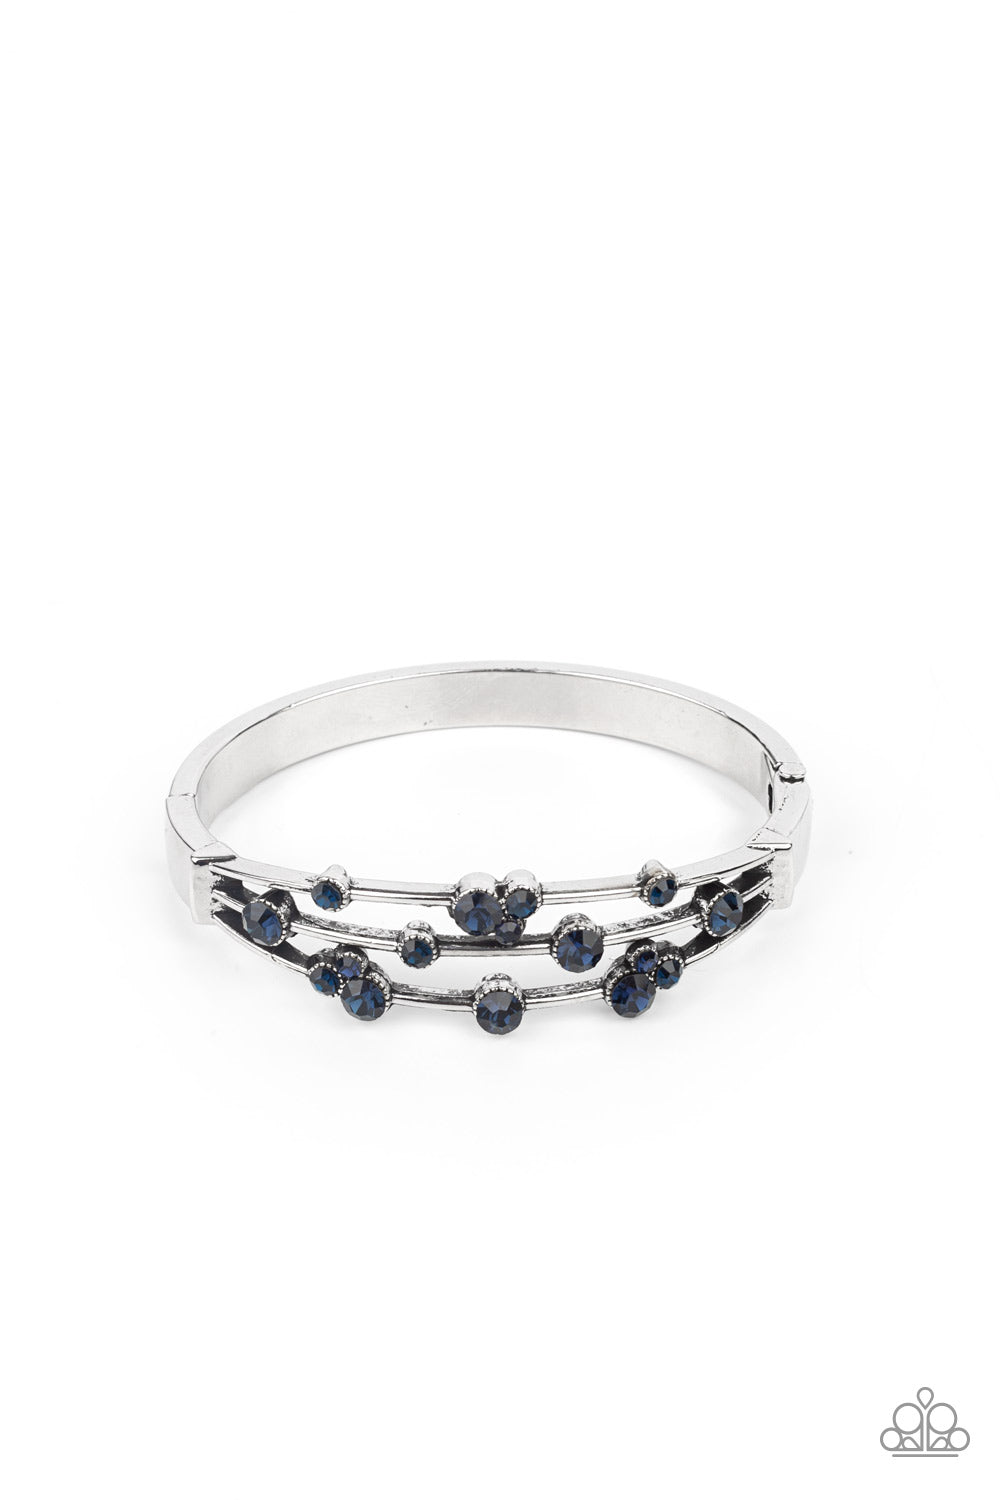 Paparazzi Cosmic Candescence - Blue Bracelet - A Finishing Touch Jewelry